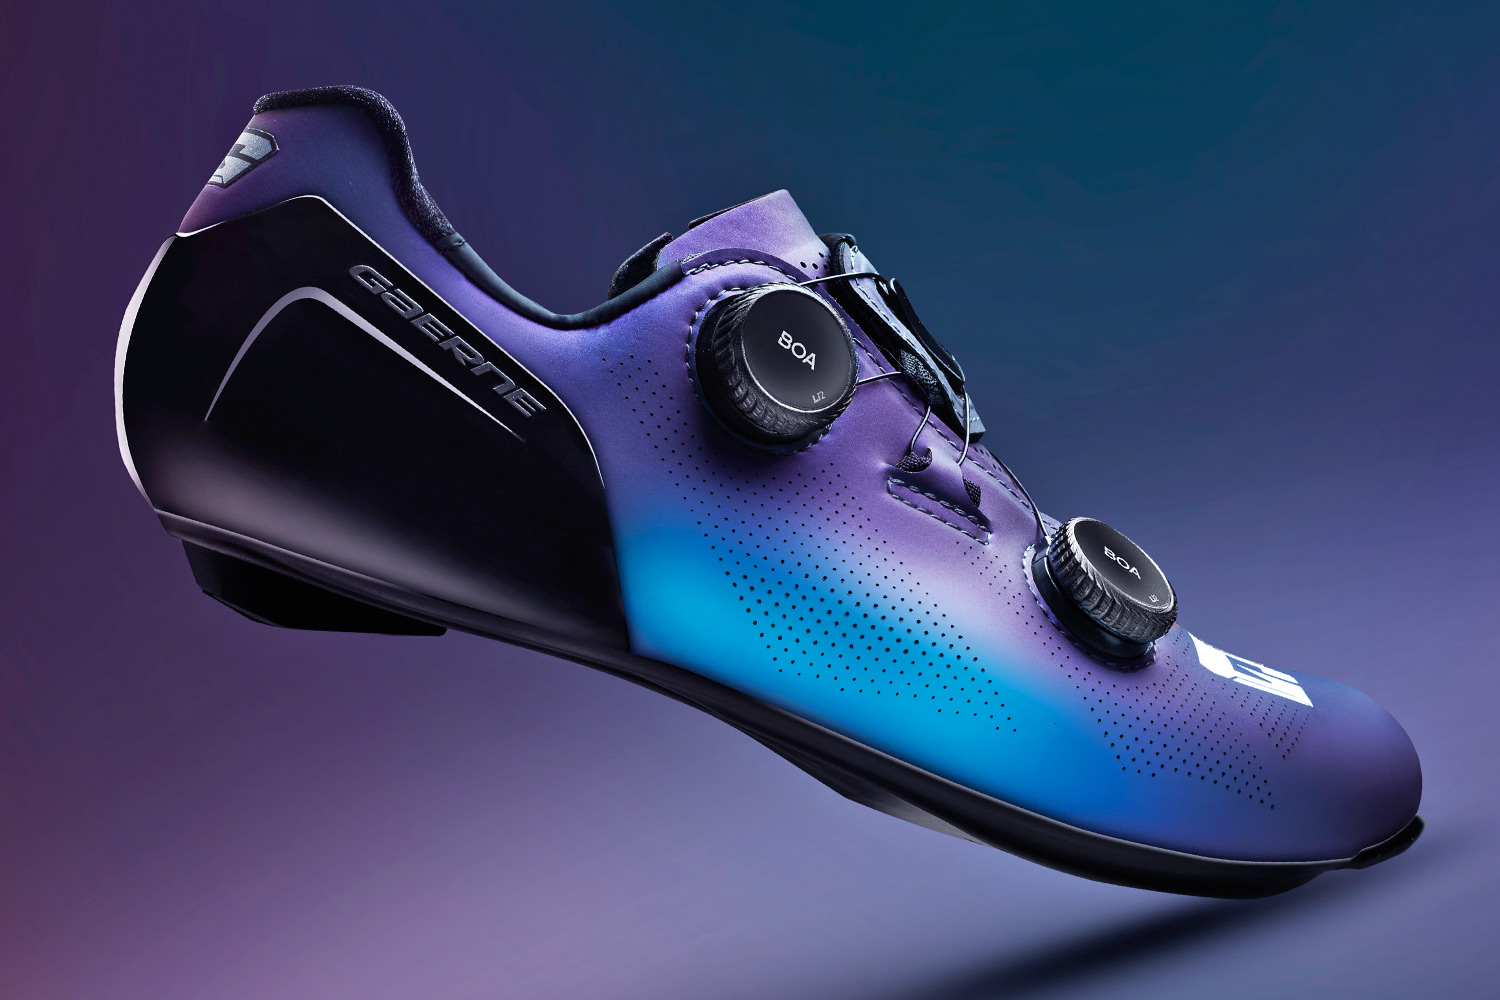 Gaerne G.STL road shoes, top-tier made-in-Italy performance carbon road race bike shoe, Iridium iridescent purple